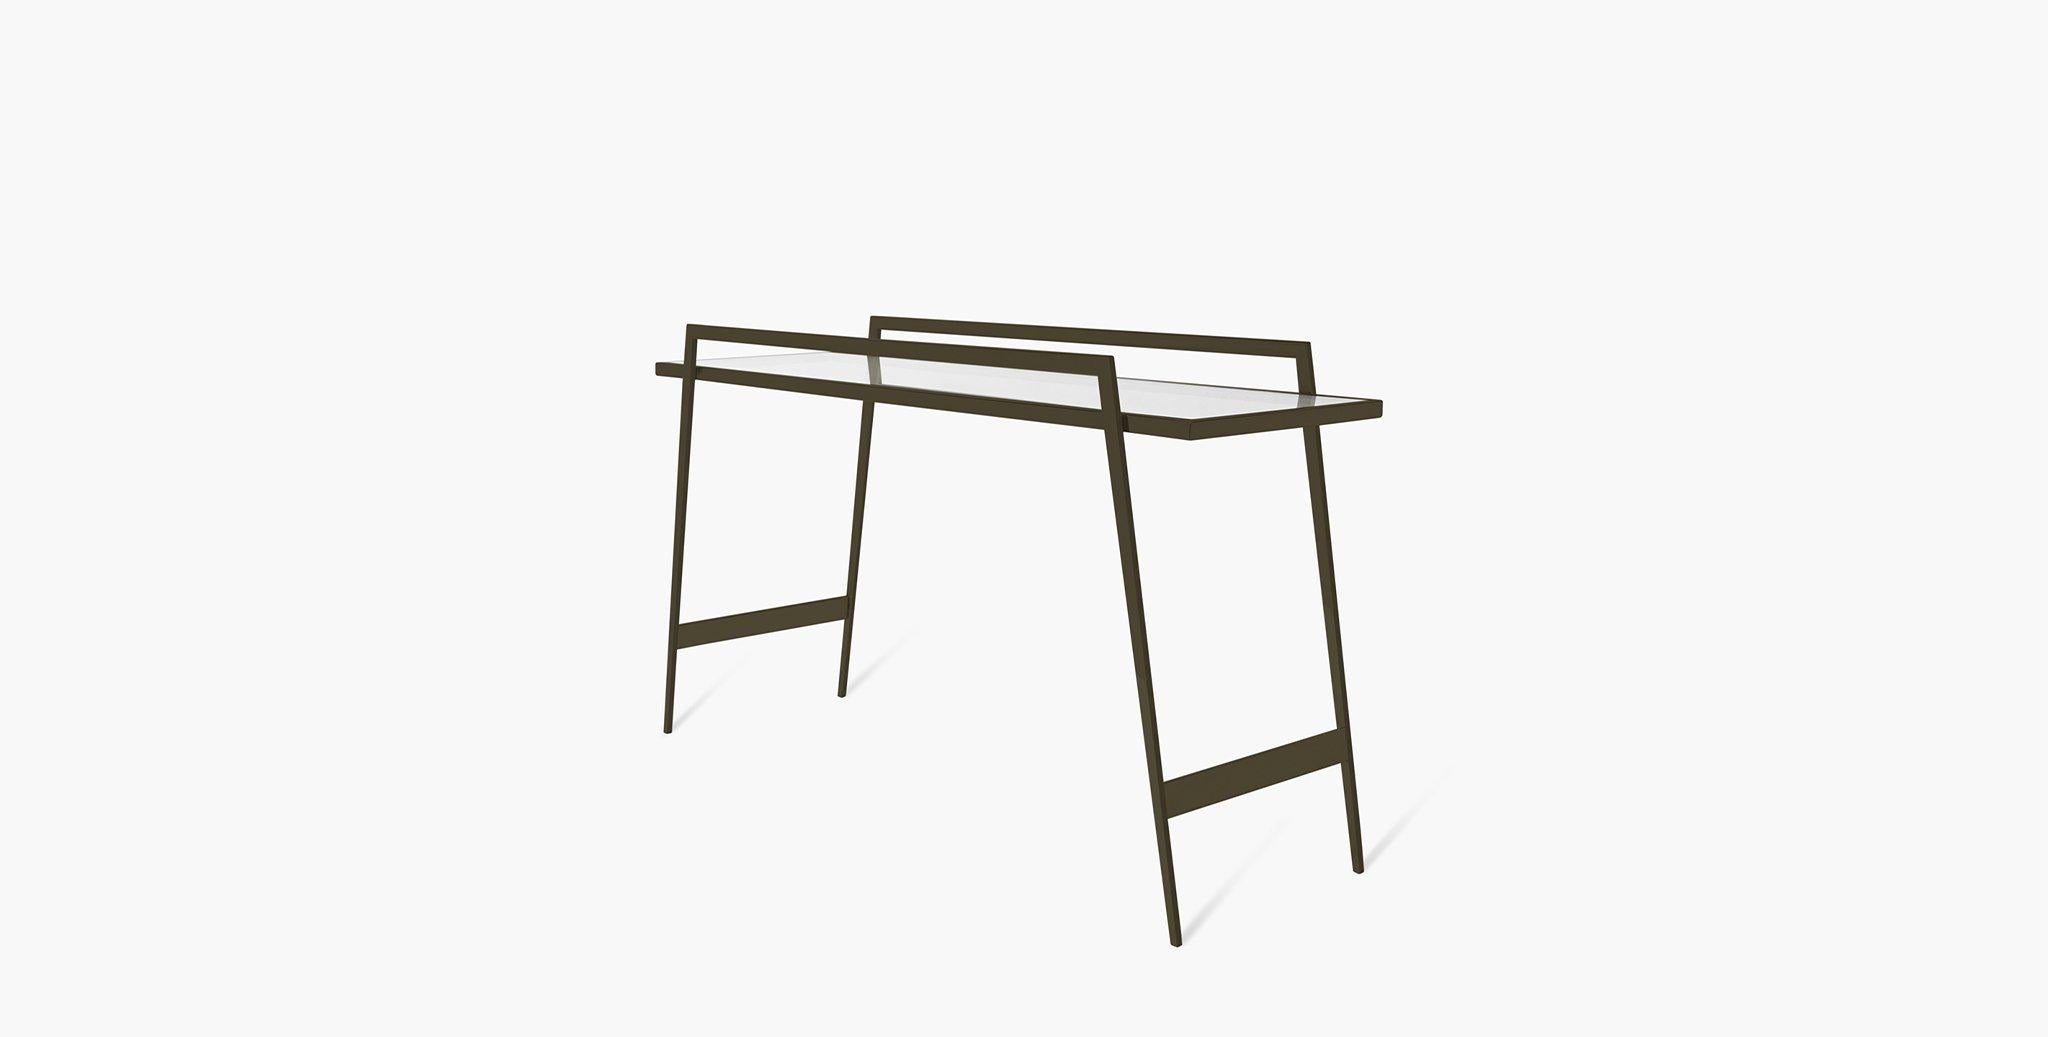 The Palisade Console Table glimmers with metal and the sheen of glass, inviting light into your space. Two elevated rails provide a definitive border for your tabletop display.

Dual elevated rails
Clear glass tabletop
Tapered legs
Steel